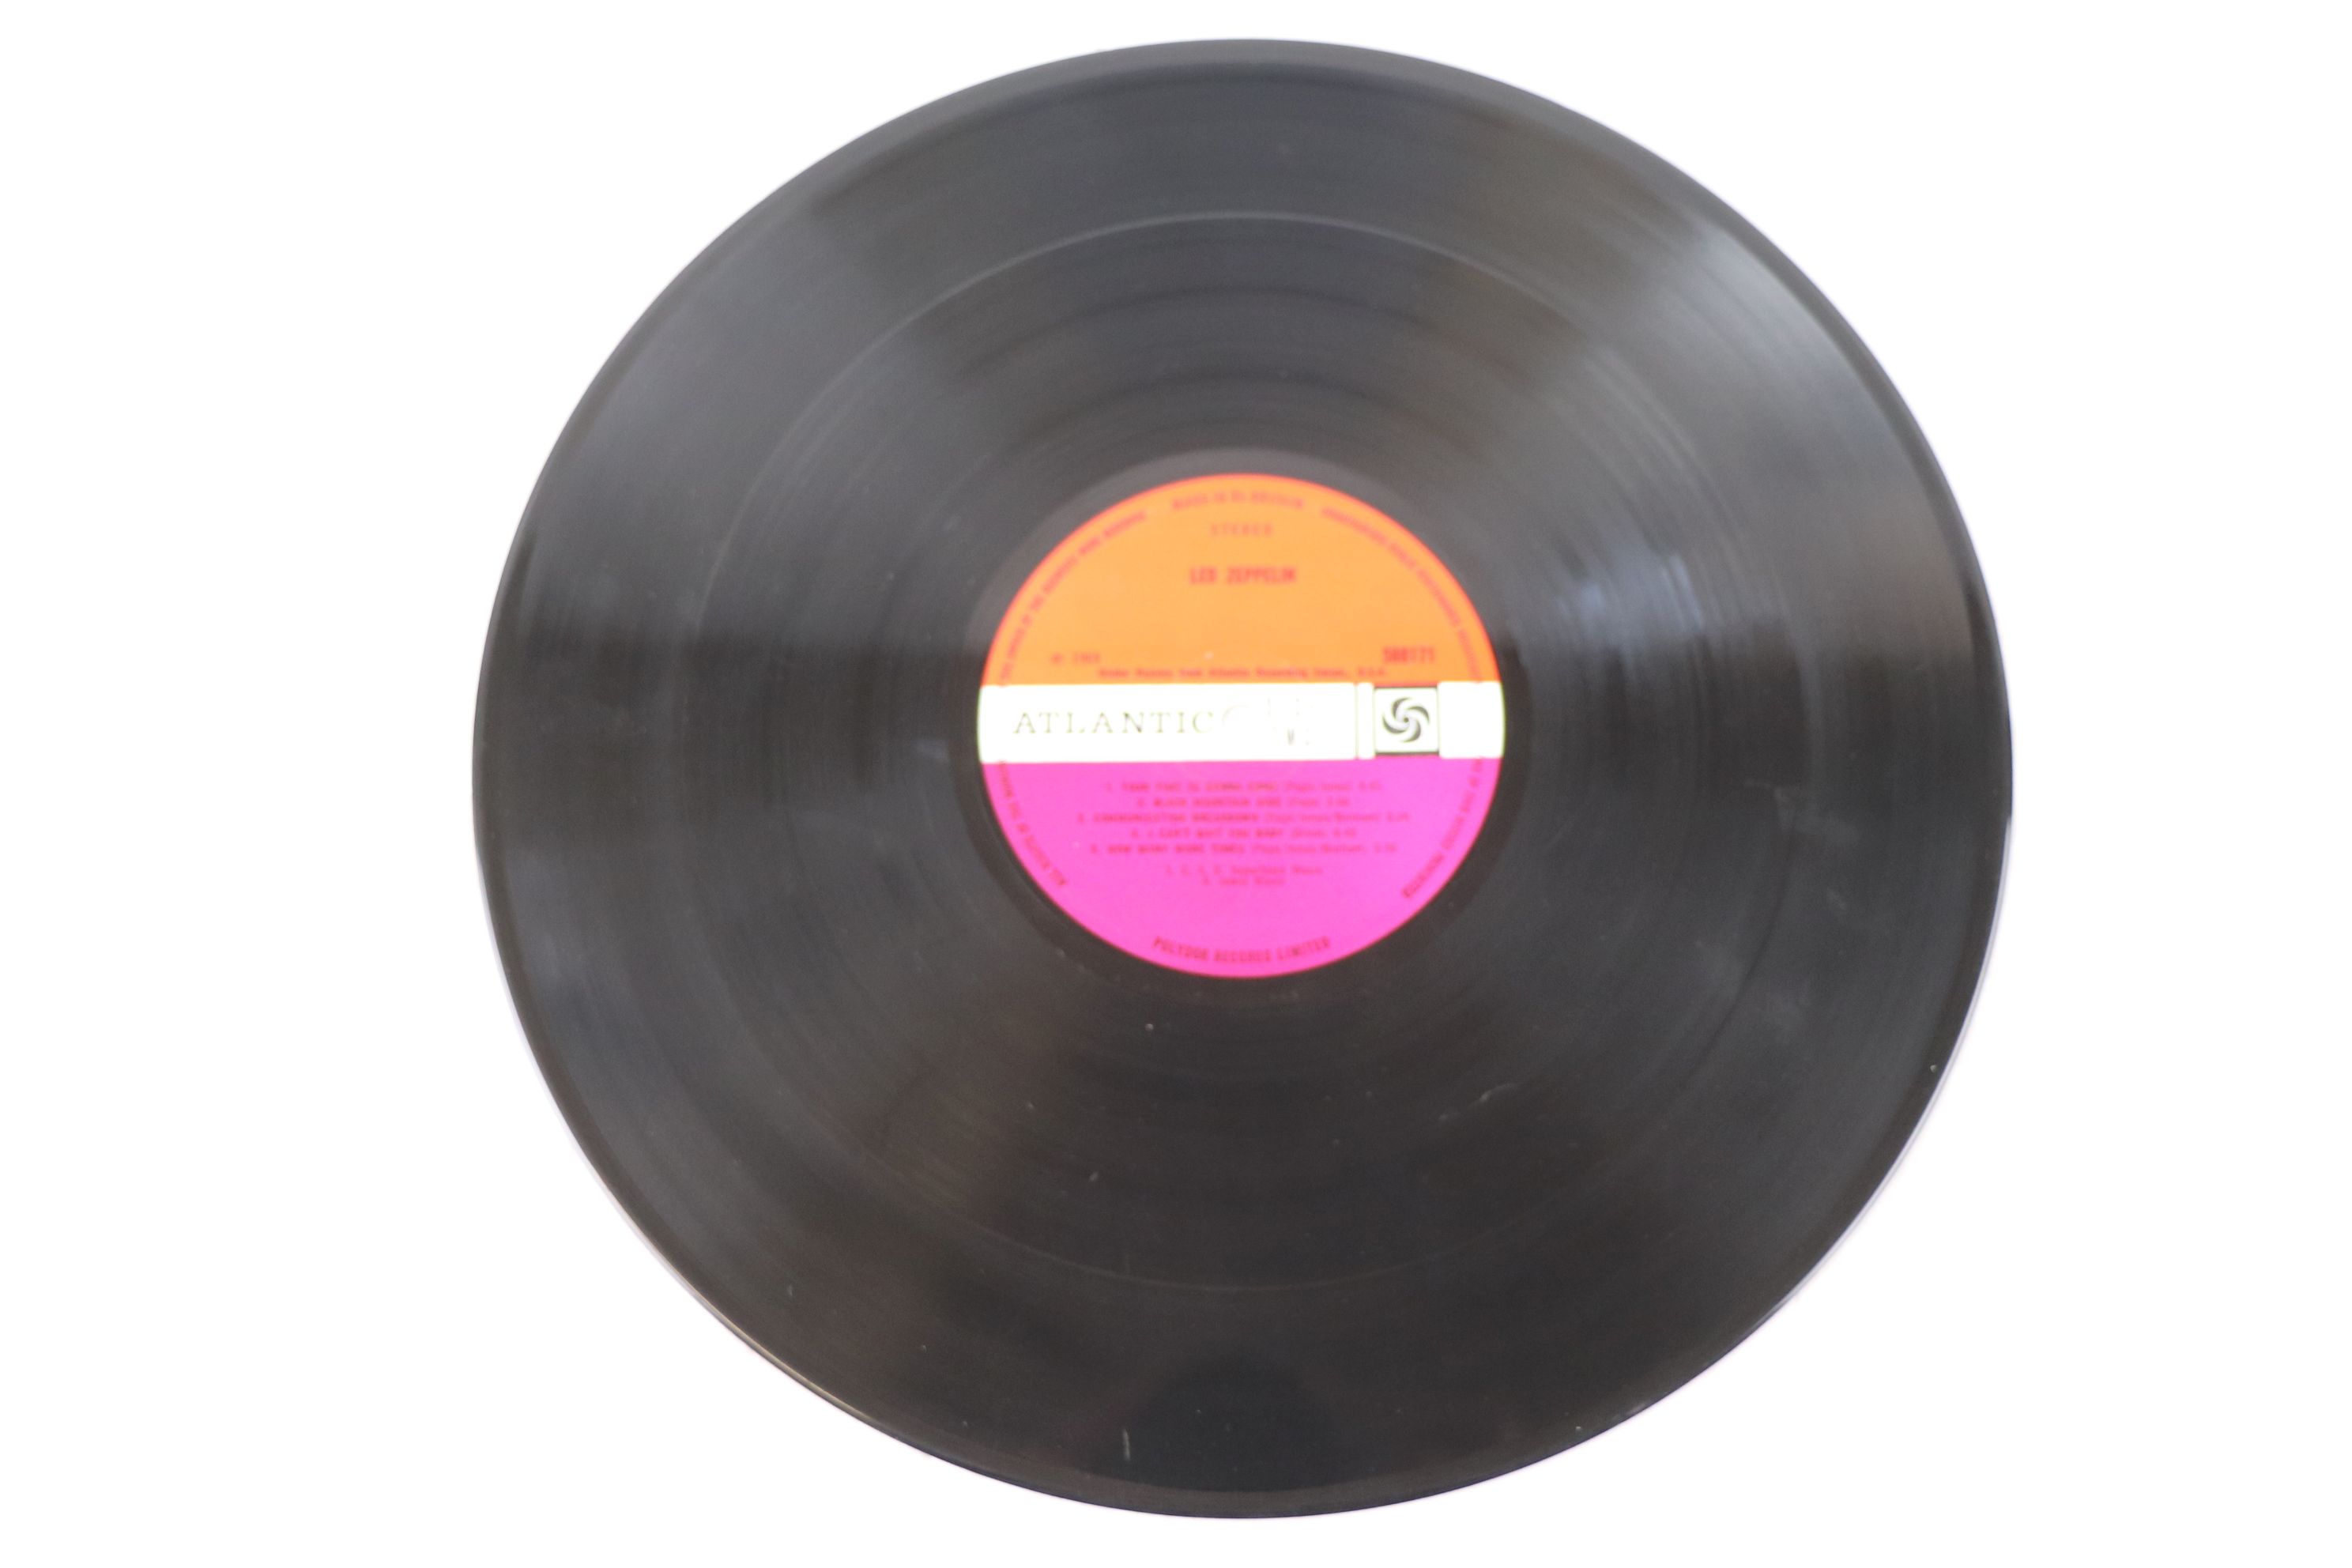 Vinyl - Led Zeppelin One (Atlantic 588171) stereo, with plum label, turquoise sleeve lettering - Image 6 of 12